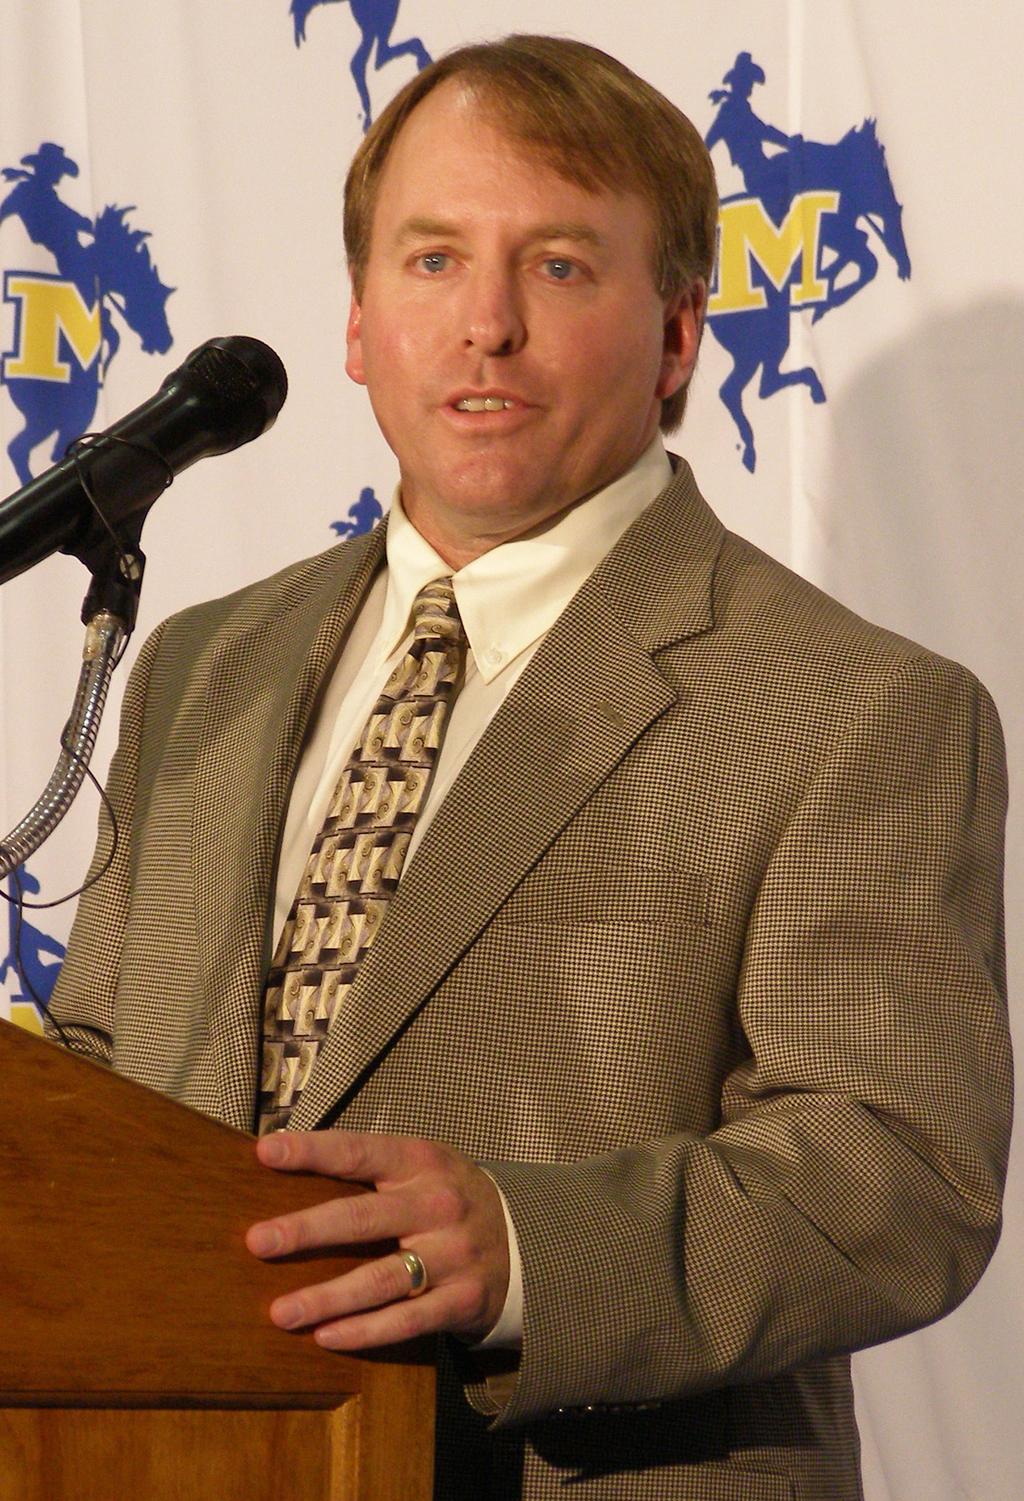 Matt Viator File Year at McNeese: eighth (joined in 1999) Age: 43, born September 3, 1963 High School: Sam Houston High 82 College: McNeese State 86 High School Athletics: all-district QB in